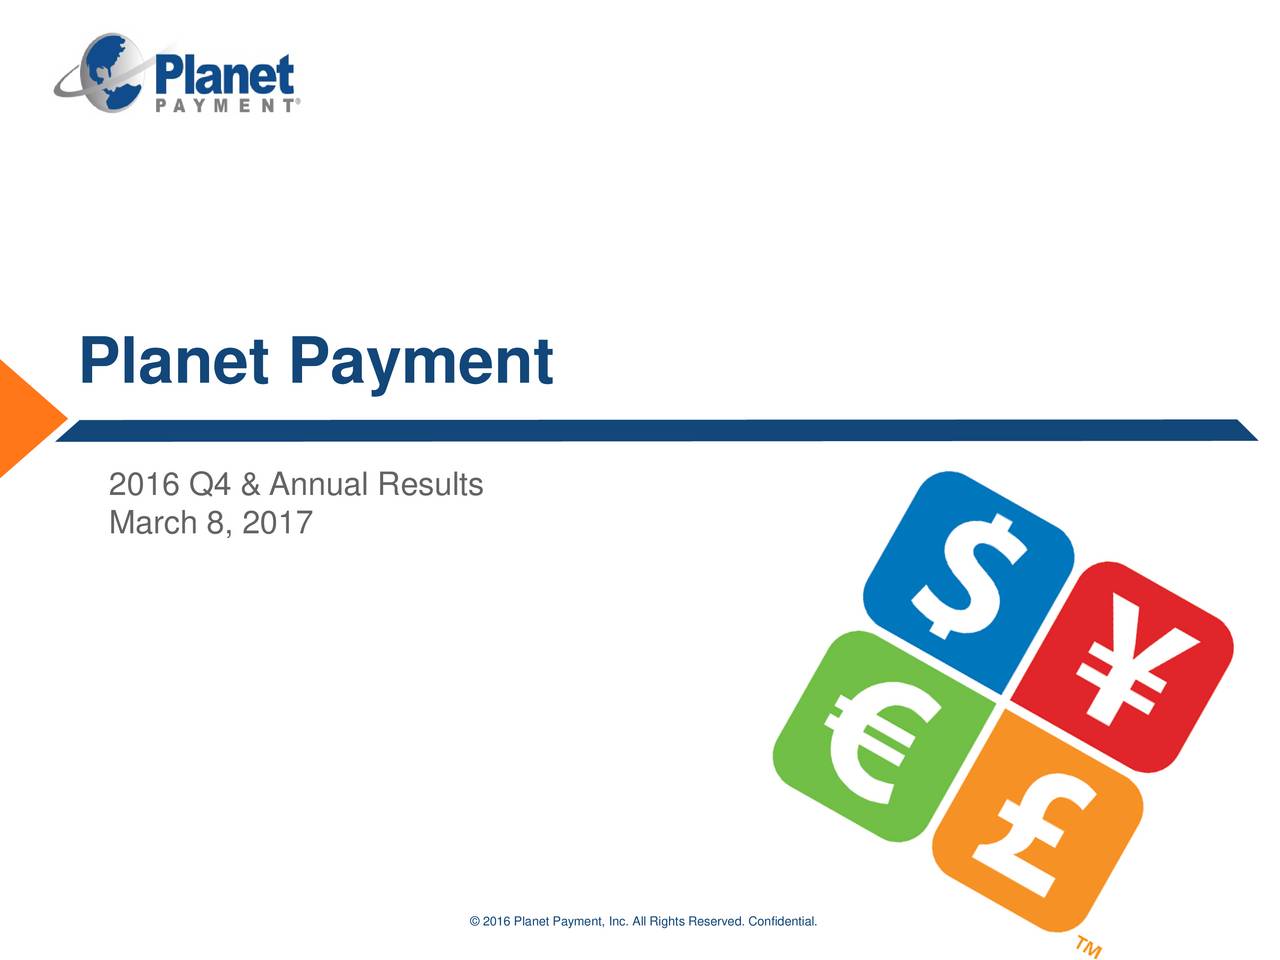 Planet Payment Inc 2016 Q4 Results Earnings Call Slides Planet Payment Inc Nasdaq 0514